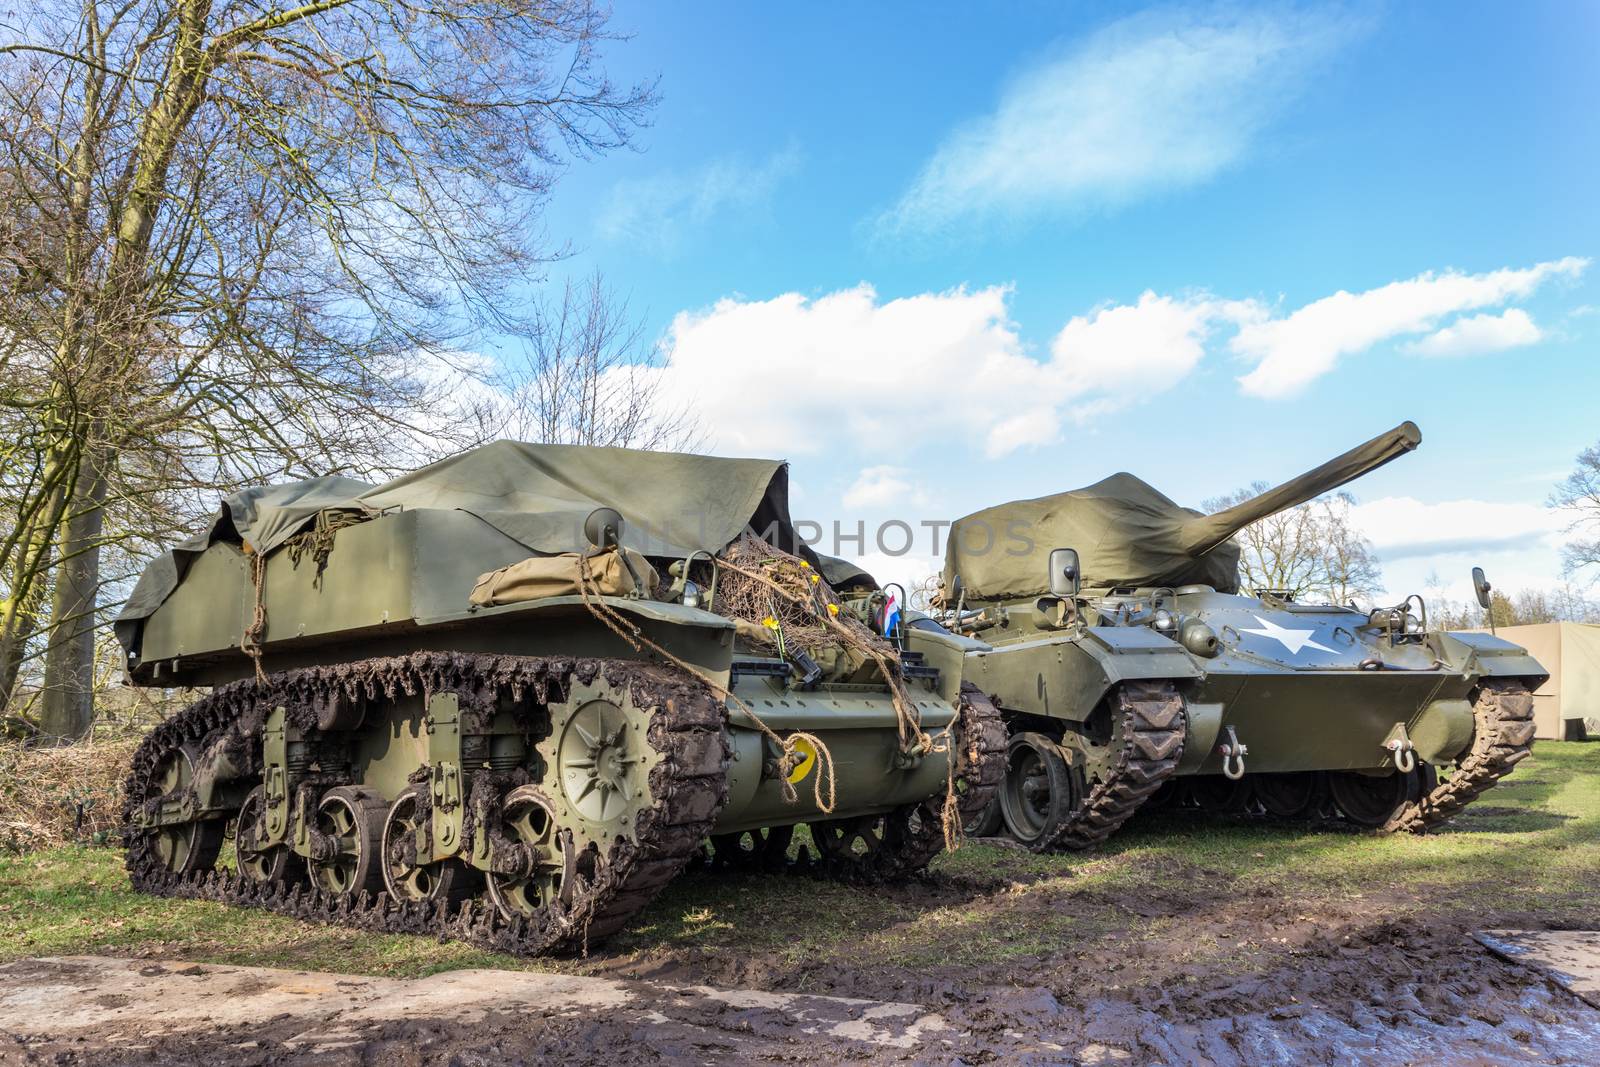 Two military tanks parked for exhibition in nature with blue sky and white clouds